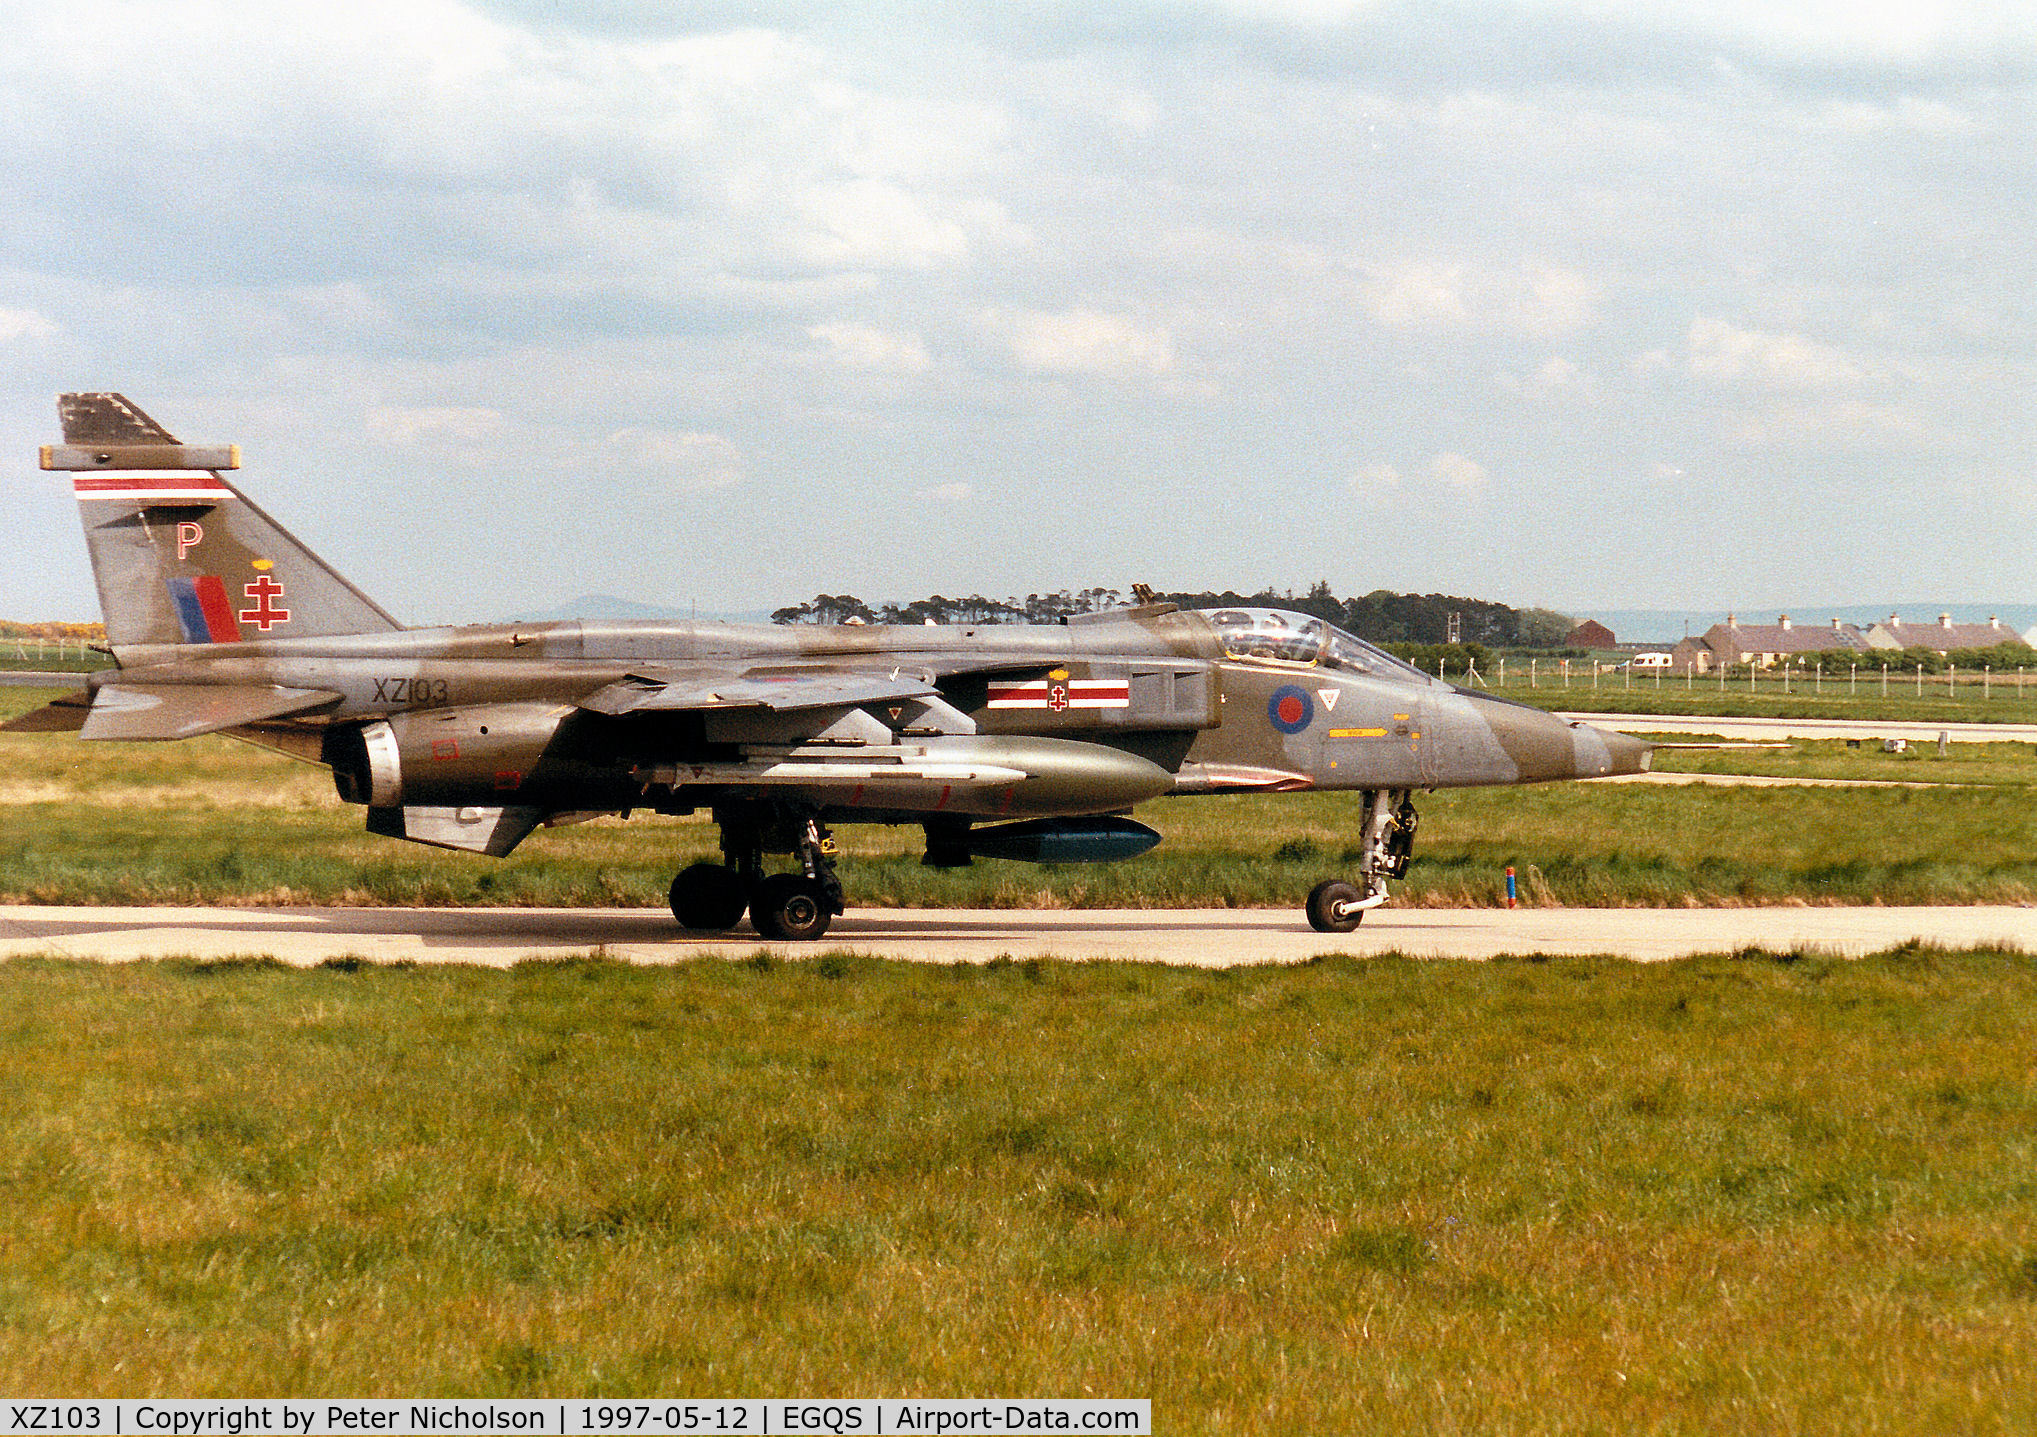 XZ103, 1976 Sepecat Jaguar GR.1A C/N S.104, Jaguar GR.1A, callsign Boxer 3, of 41 Squadron at RAF Coltishall taxying to Runway 05 at RAF Lossiemouth in the Summer of 1997.